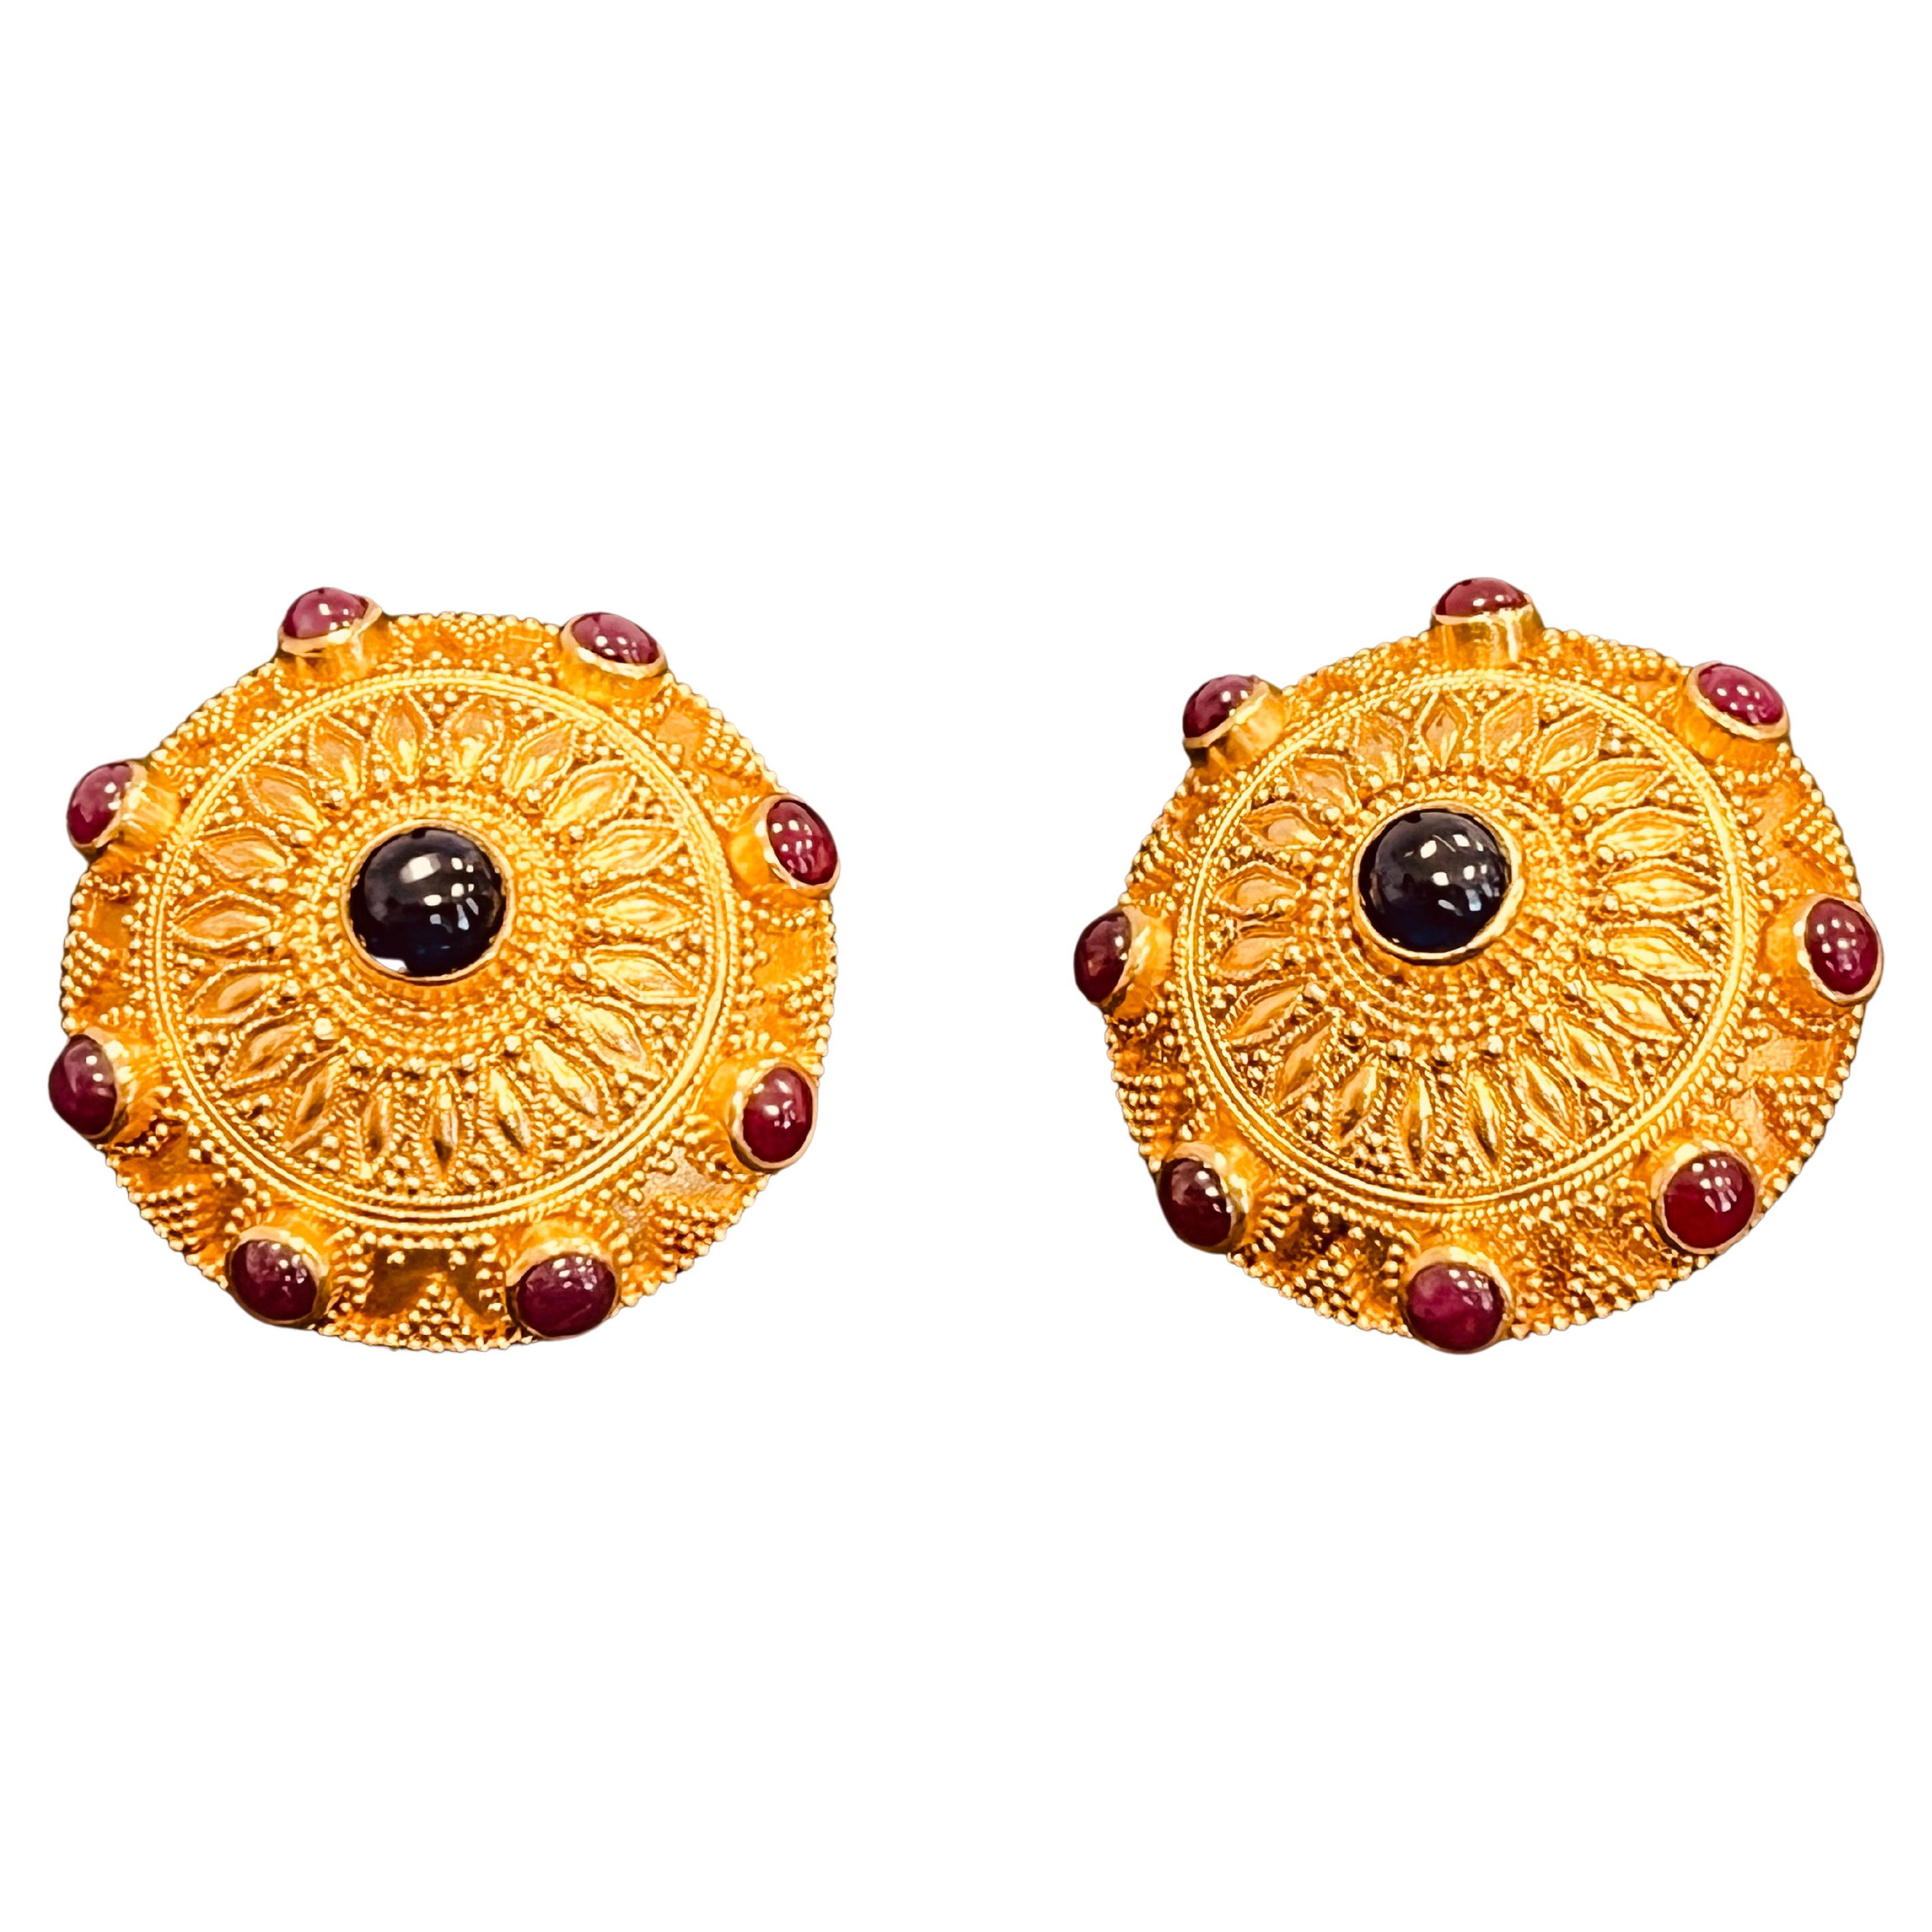 22ct Gold Byzantine Inspired Ear Clips Studded With Cabochon Sapphire and Ruby For Sale 3